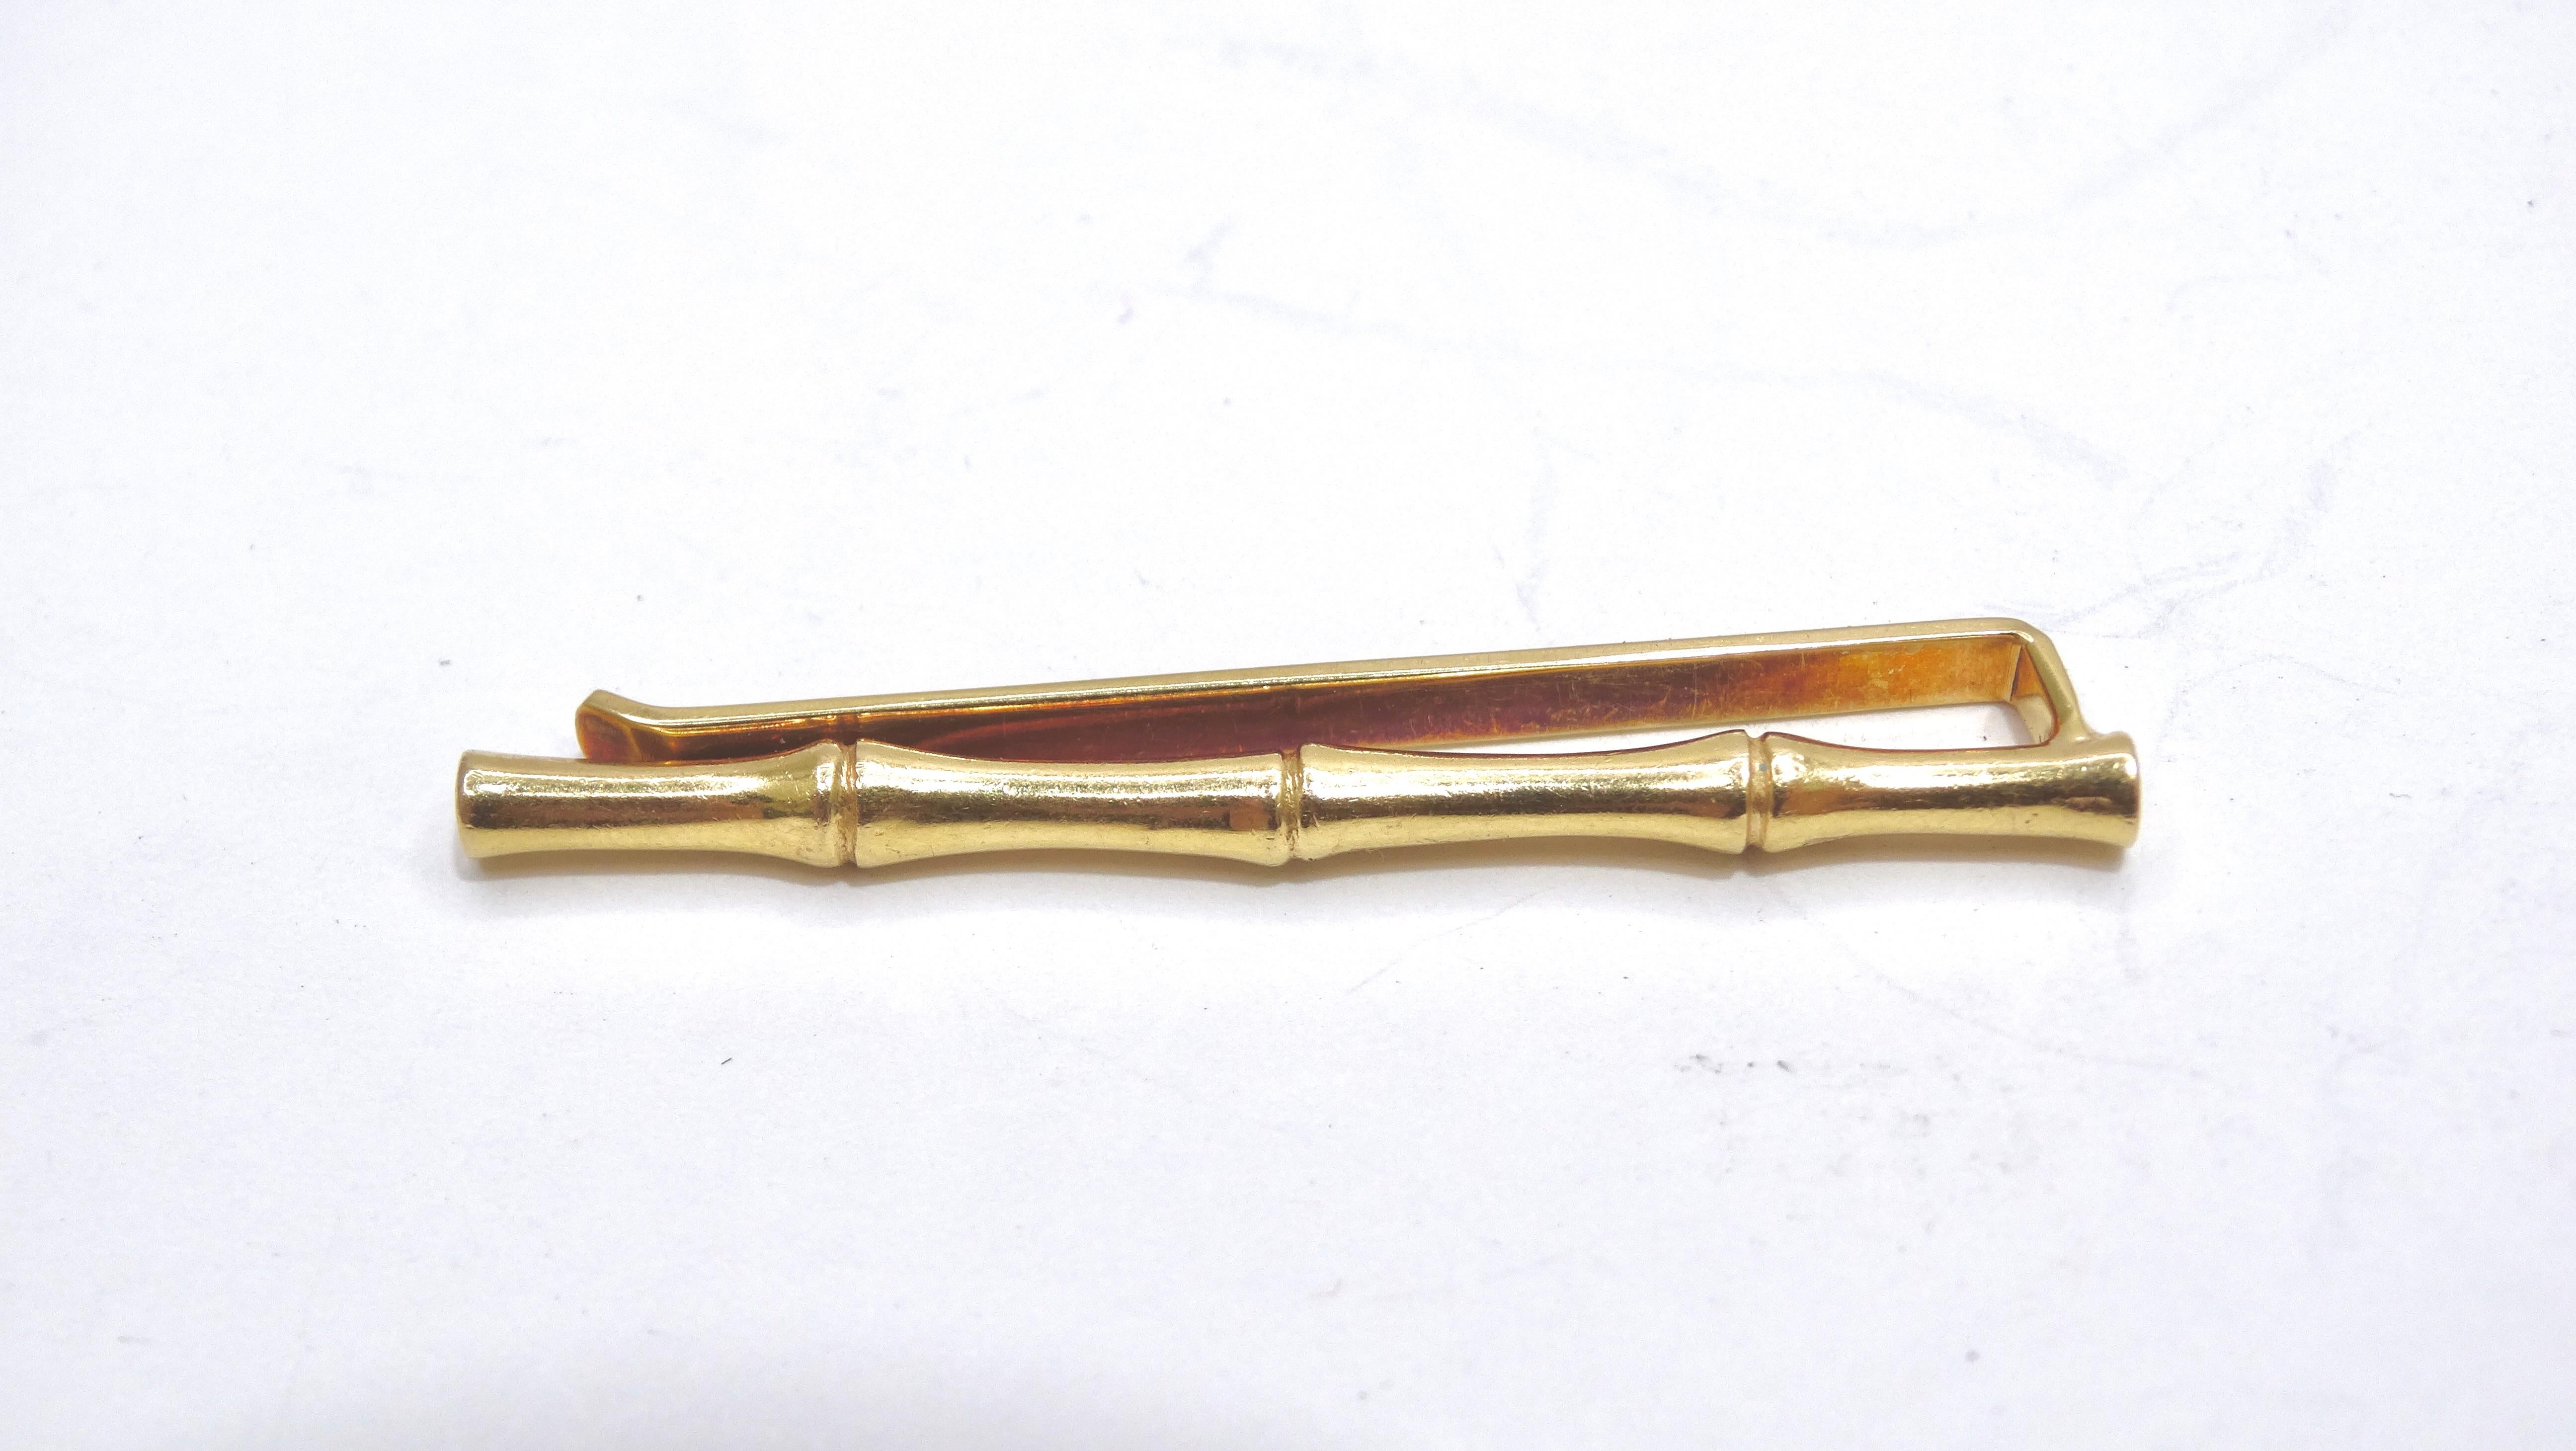 Accessorize your next vacation formal wear this this 14k gold bamboo tie clip. Everyone knows it's all in the details. Pair this with a Giorgio Armani dress shirt, smart linen trousers, and a linen blazer. Signed 'TIFFANY & CO'. Can be used as a